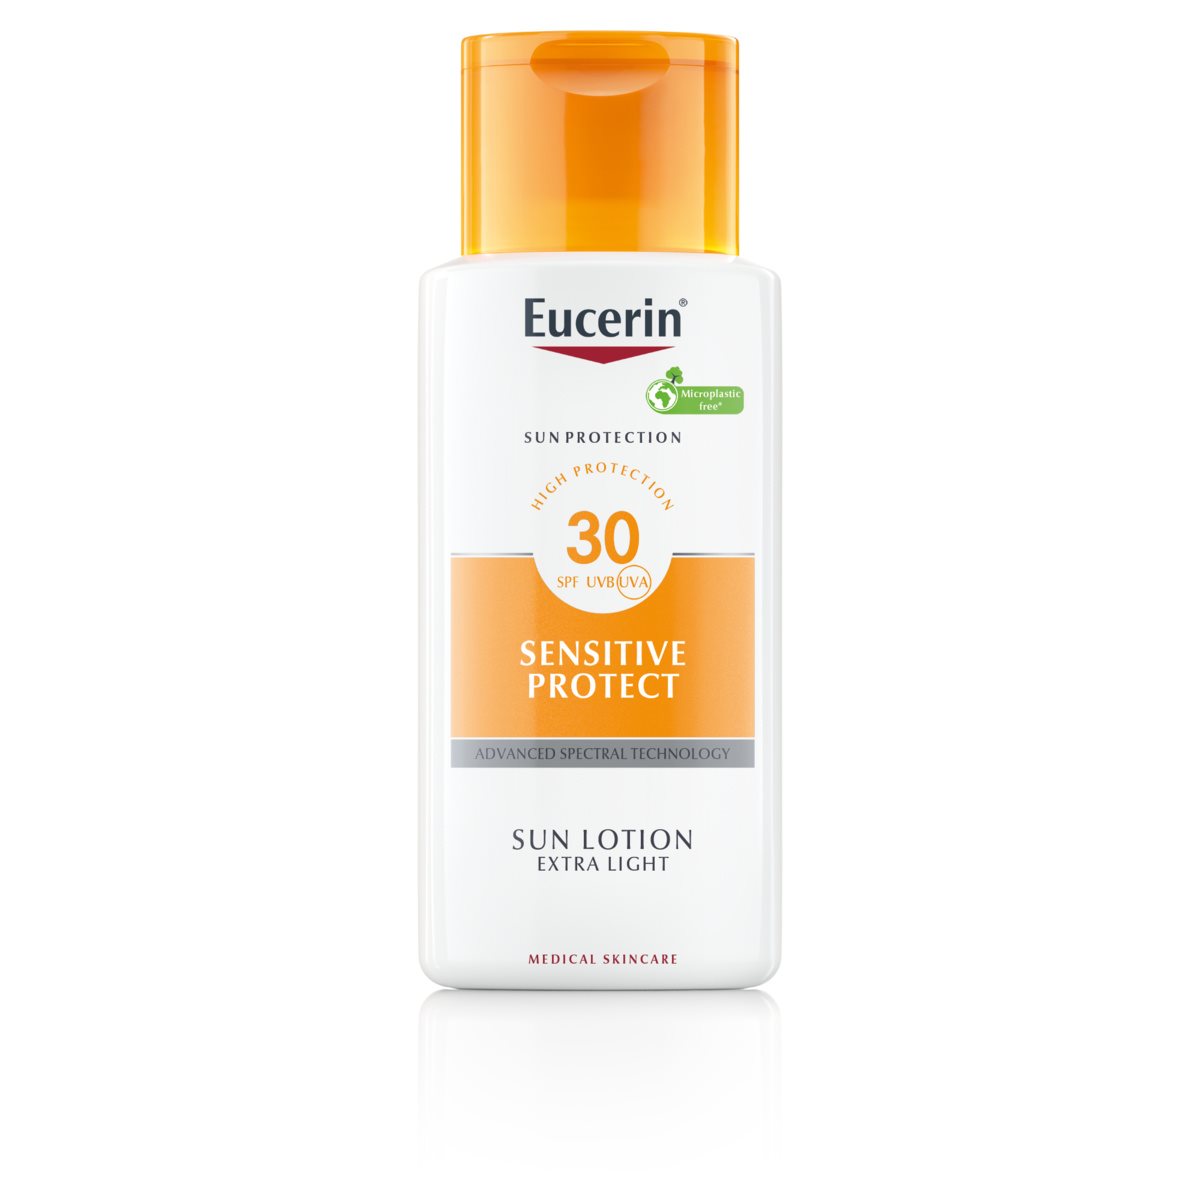 Sun protection | Sunscreen and after sun |